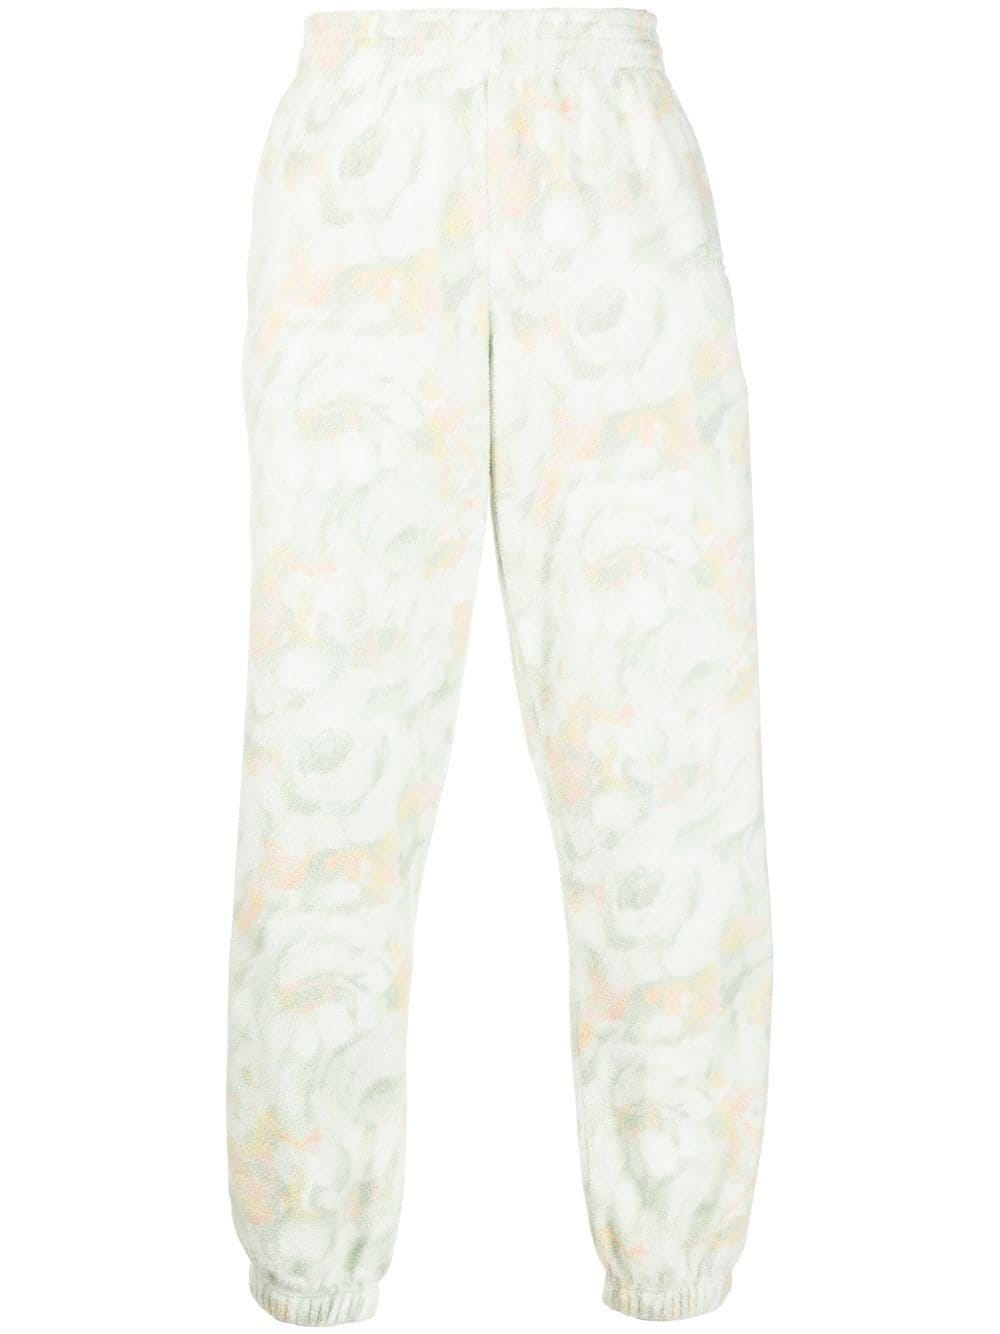 MARTINE ROSE WHITE TEXTURED FLORAL-PRINT TRACK PANTS